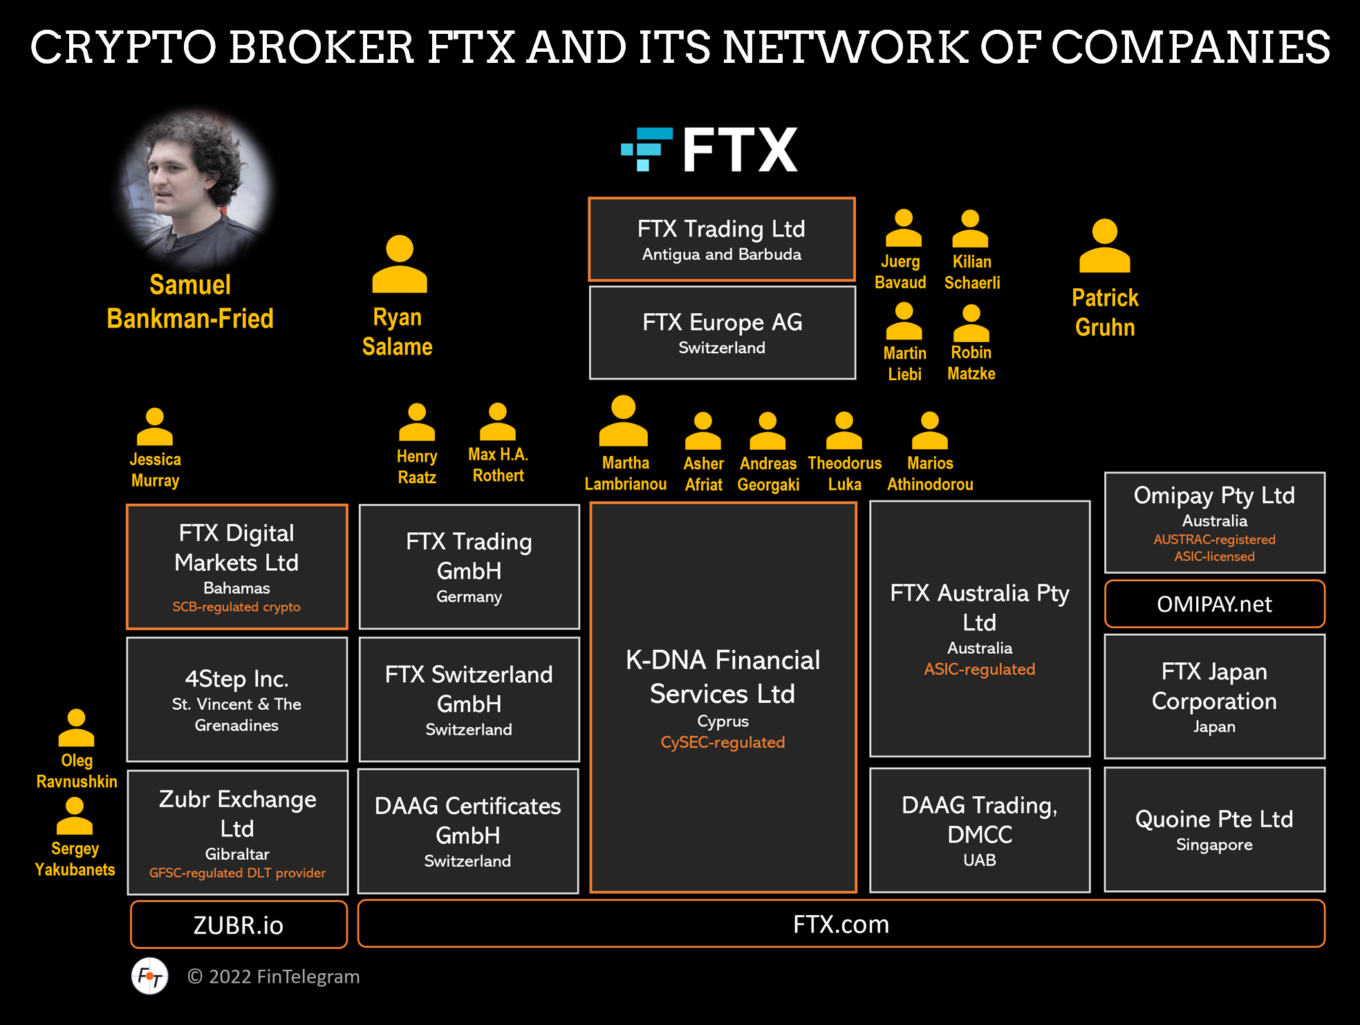 FTX-Group-of-Companies-FI-1360x1025.png